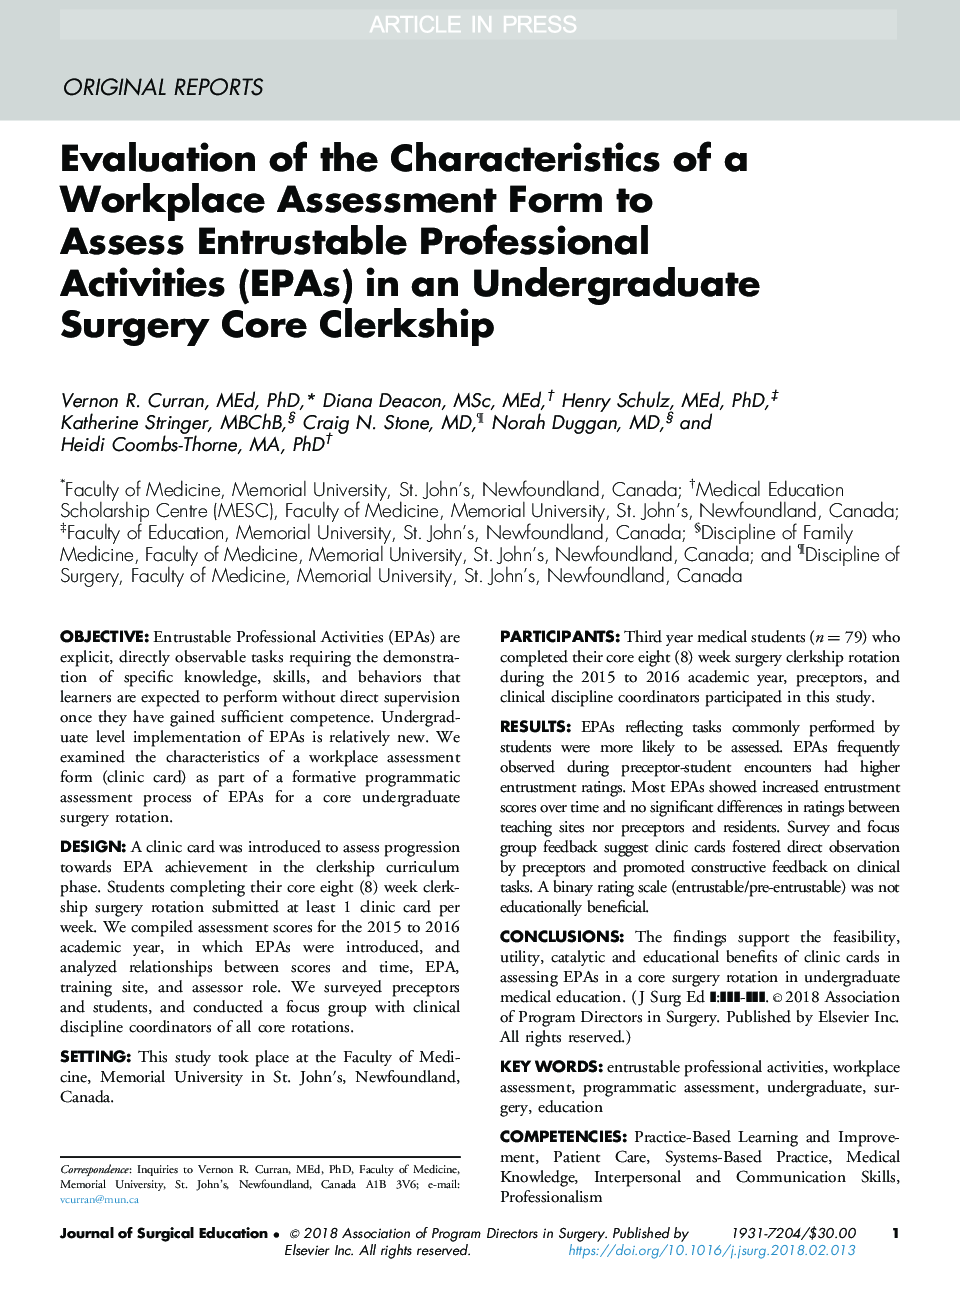 Evaluation of the Characteristics of a Workplace Assessment Form to Assess Entrustable Professional Activities (EPAs) in an Undergraduate Surgery Core Clerkship